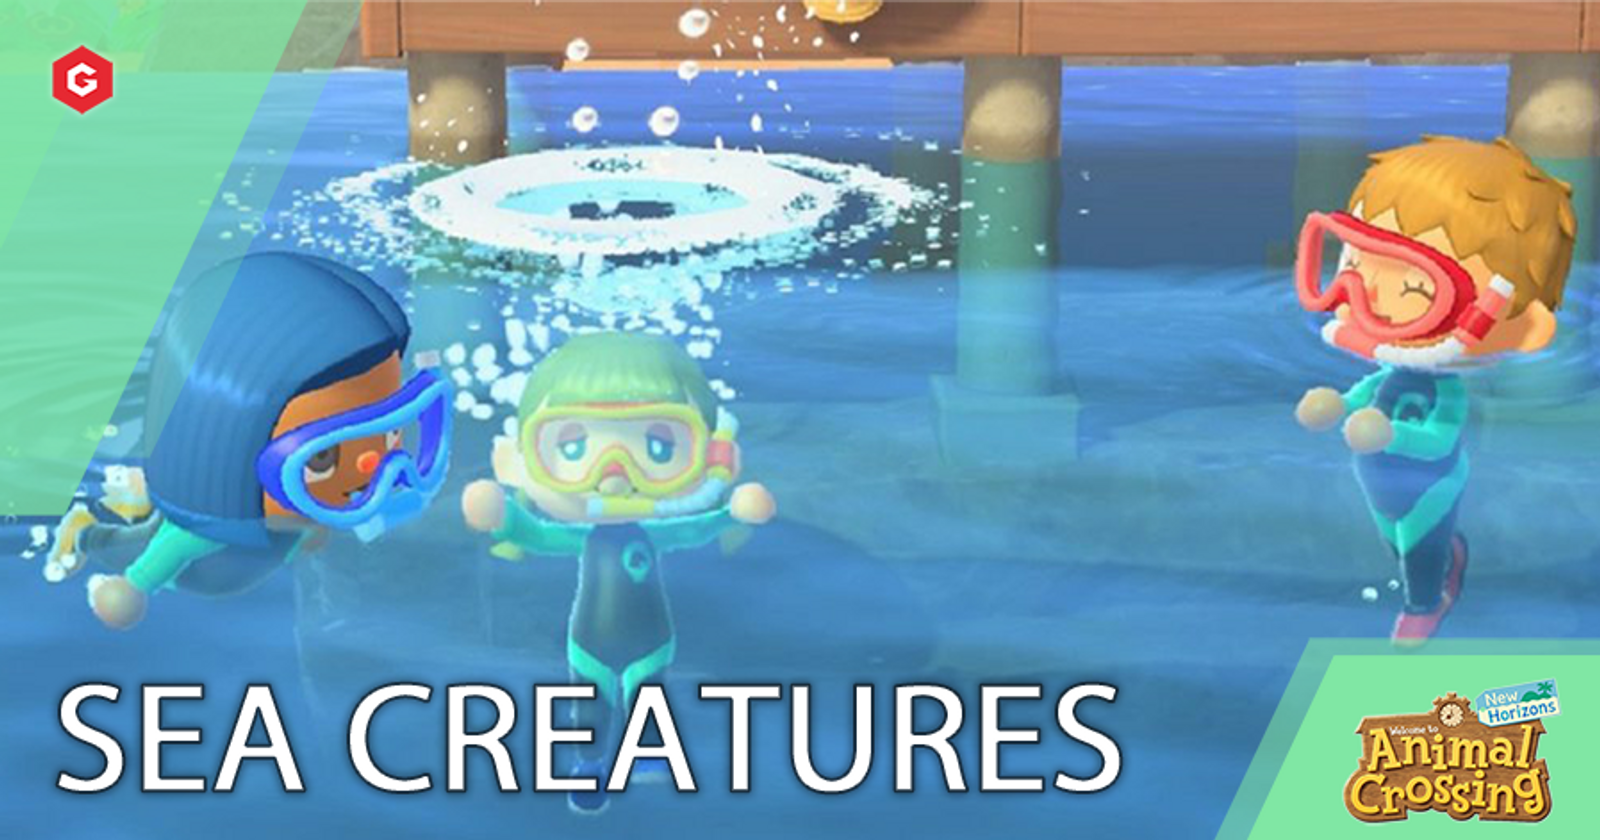 Animal Crossing, Scallop - How To Get & Price